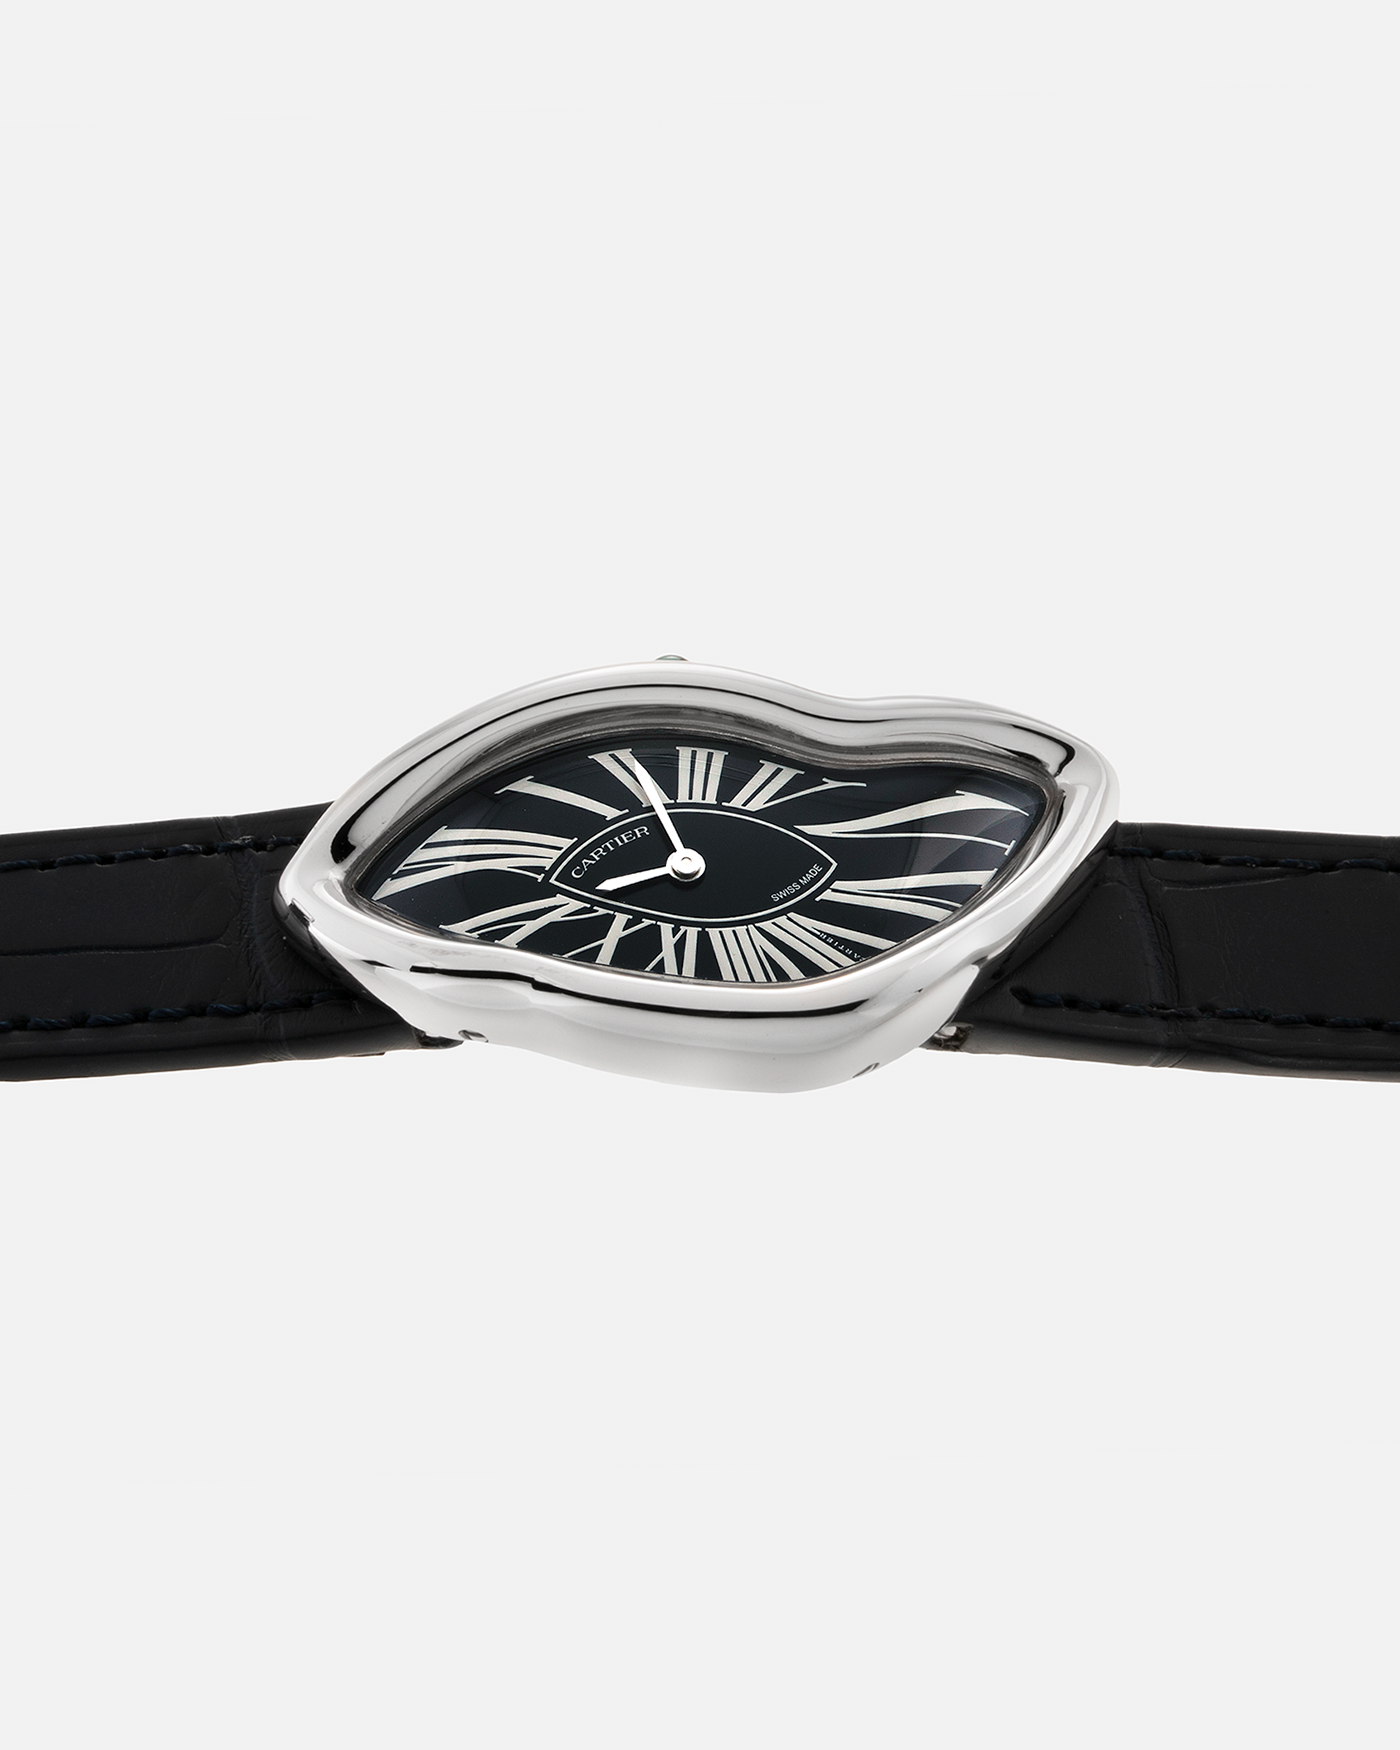 Brand: Cartier Year: 2023 Model: Crash Reference Number: WGCH0080, New Special Order Material: 18-carat White Gold (Rhodium Plated) Movement: Cartier Cal. 1917 MC, Manual-Winding Case Dimensions: 42mm x 24mm (Asymmetrical Case) Strap: Cartier Black Alligator Strap with Signed 18-carat White Gold ‘Crash’ Deployant Buckle